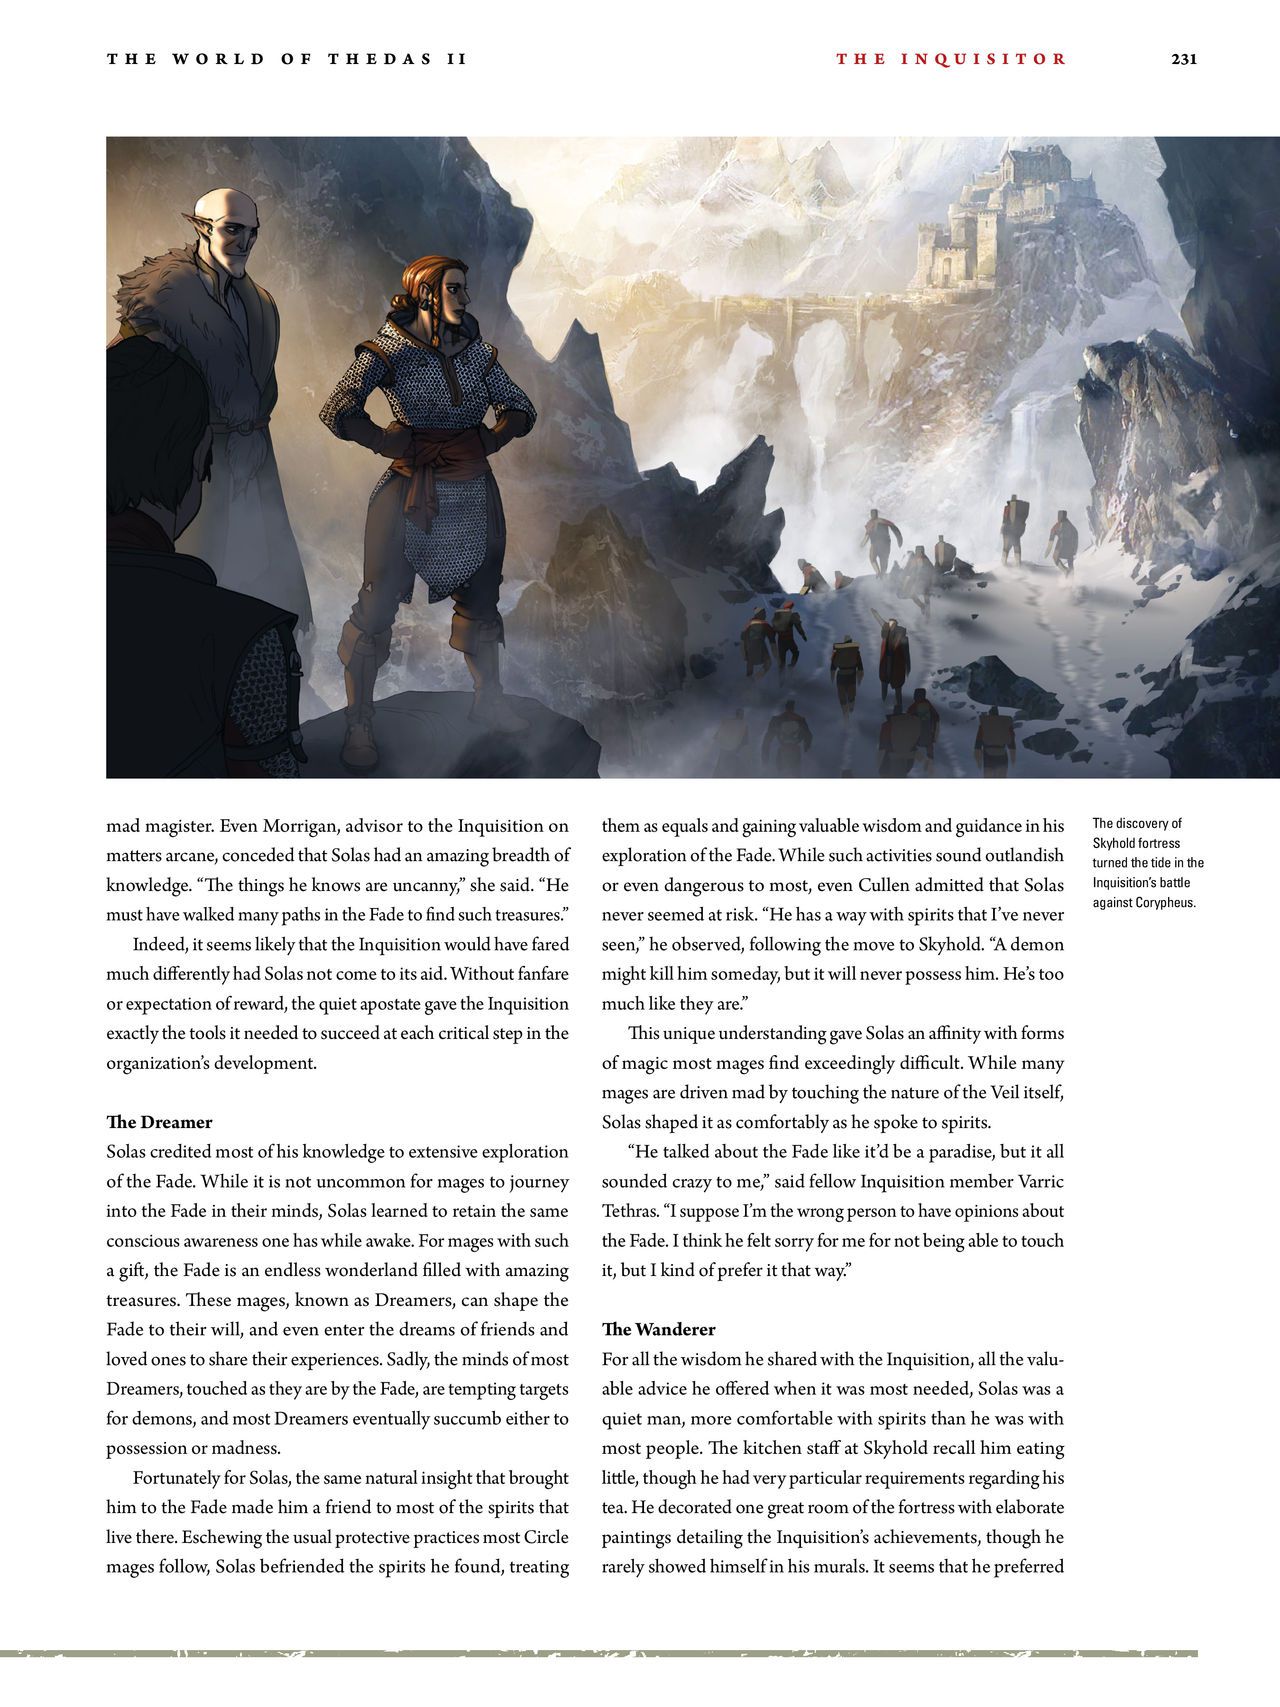 Dragon Age - The World of Thedas v02 226